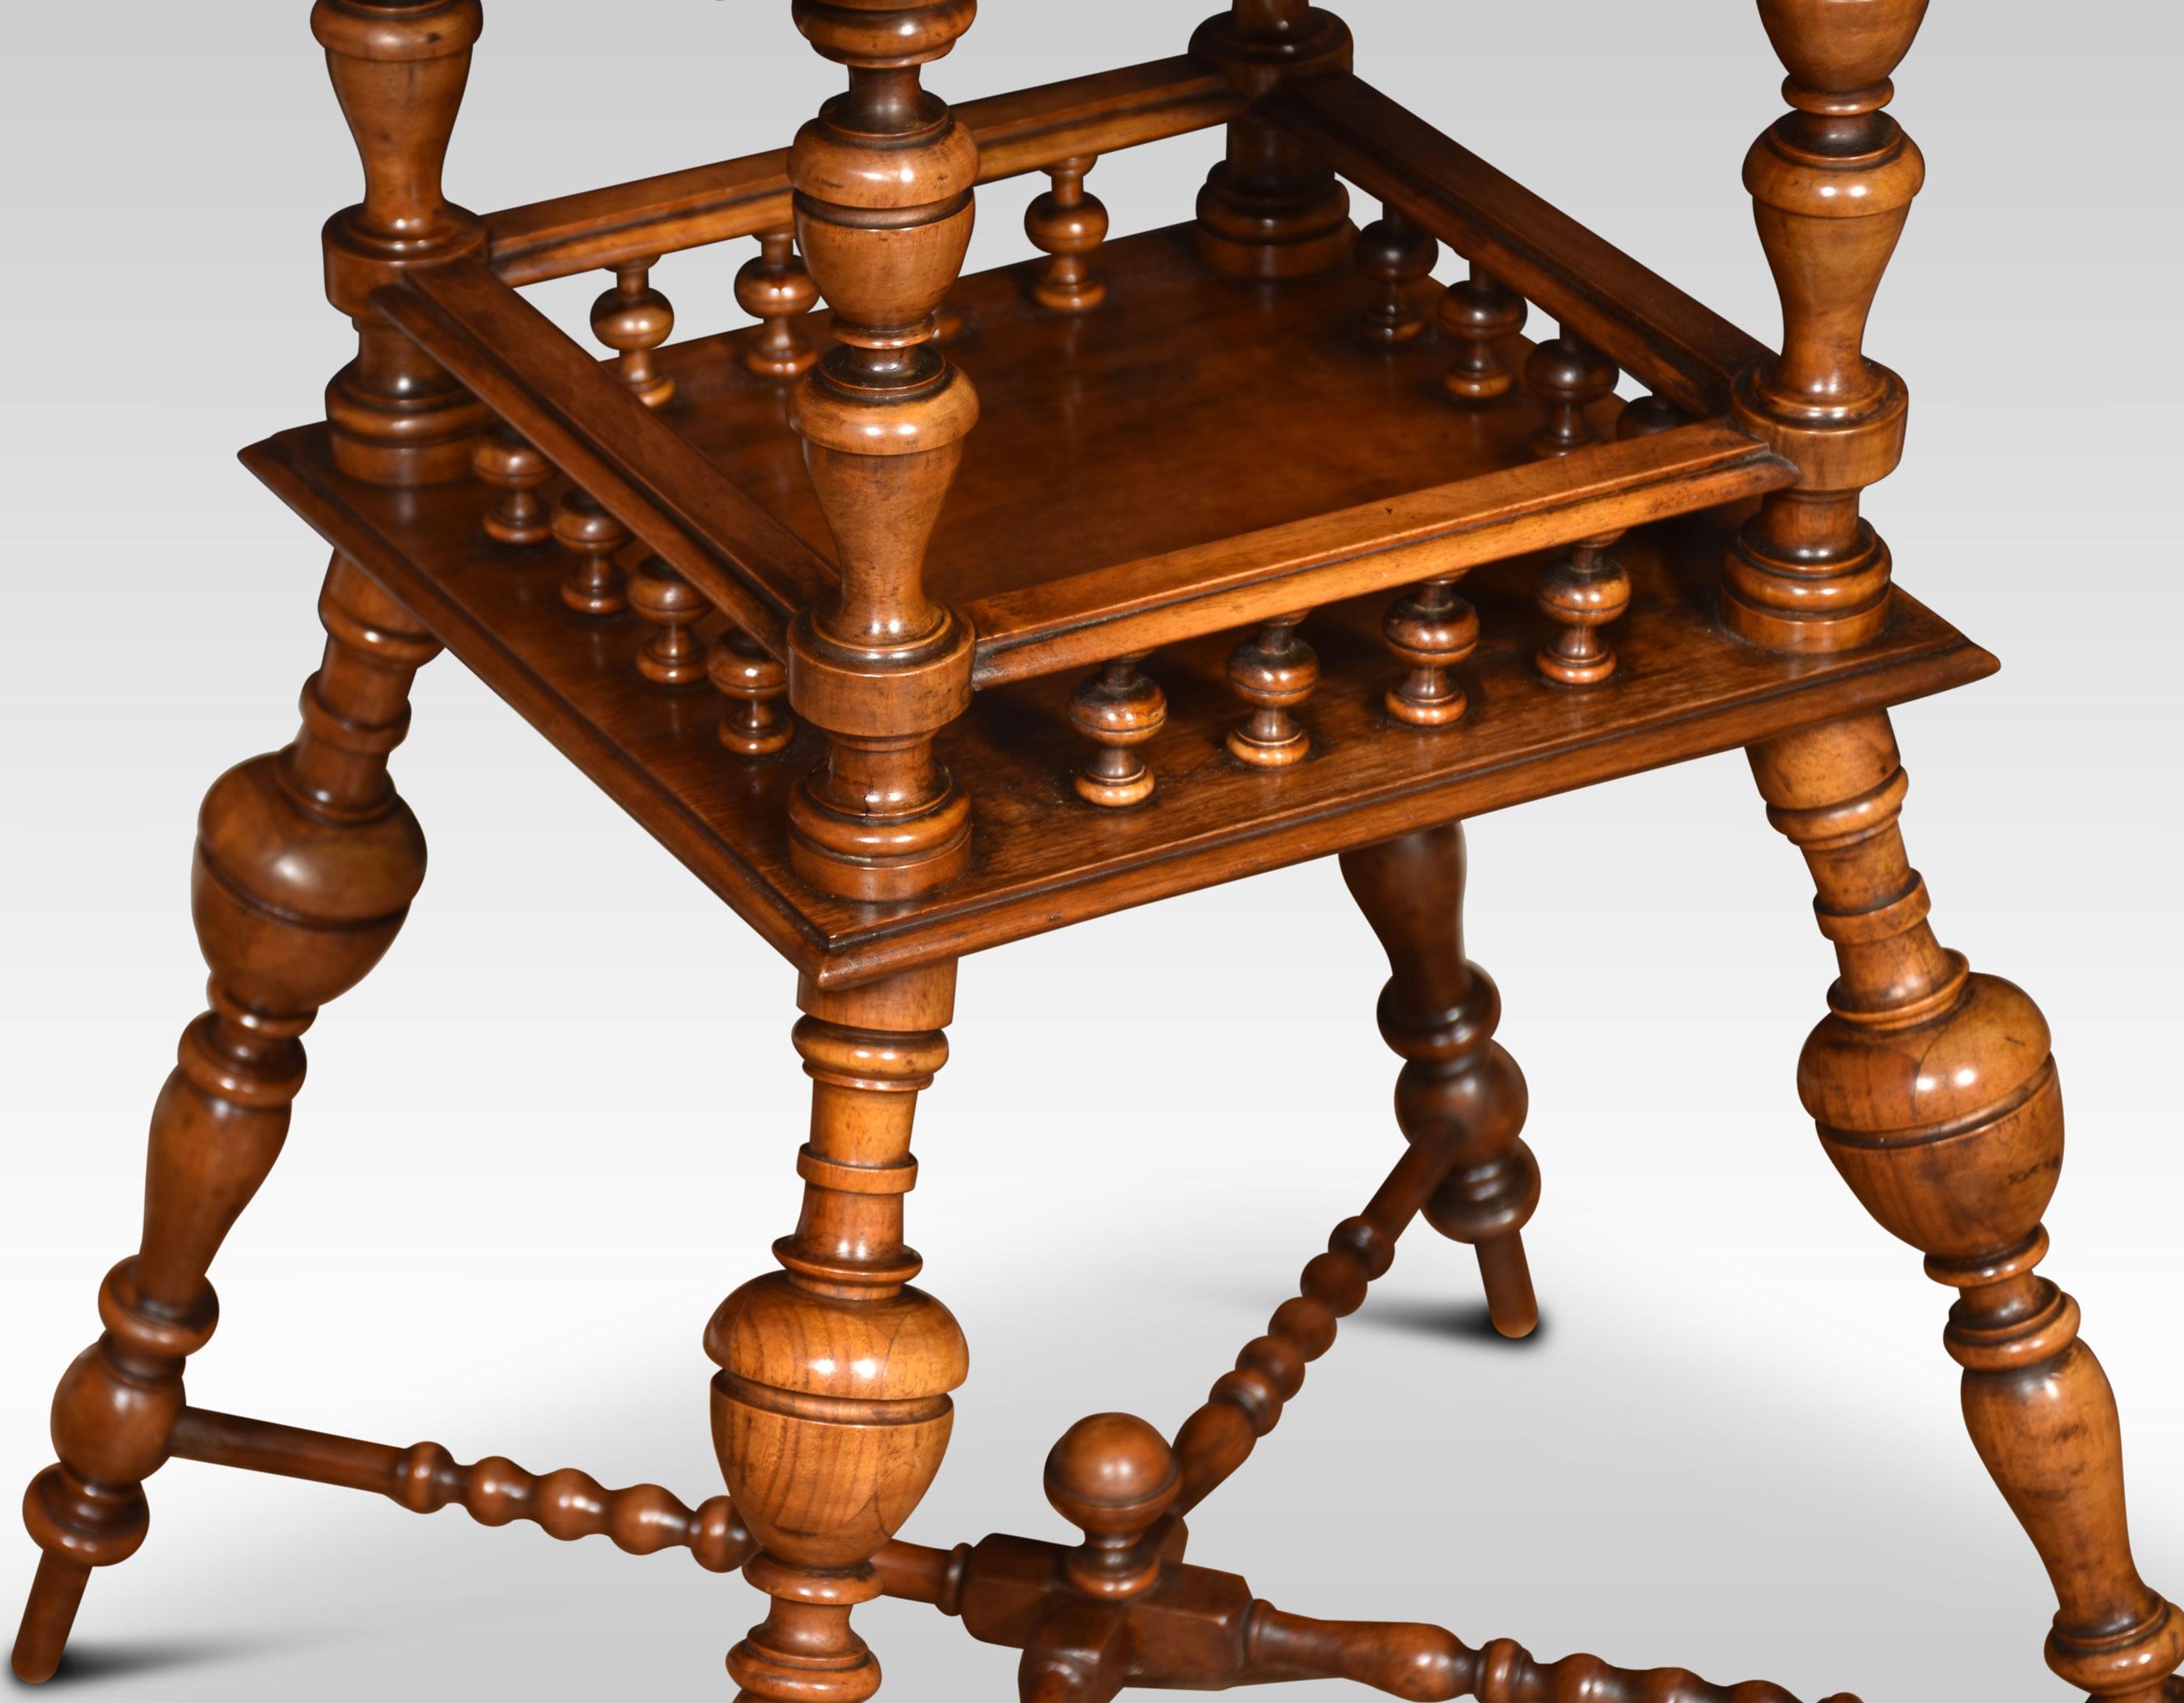 Late 19th-century occasional table, the square walnut top with molded edge supported on bobbin turned supports united by under tier and cross stretcher.
Dimensions
Height 28 Inches
Width 18 Inches
Depth 18 Inches.